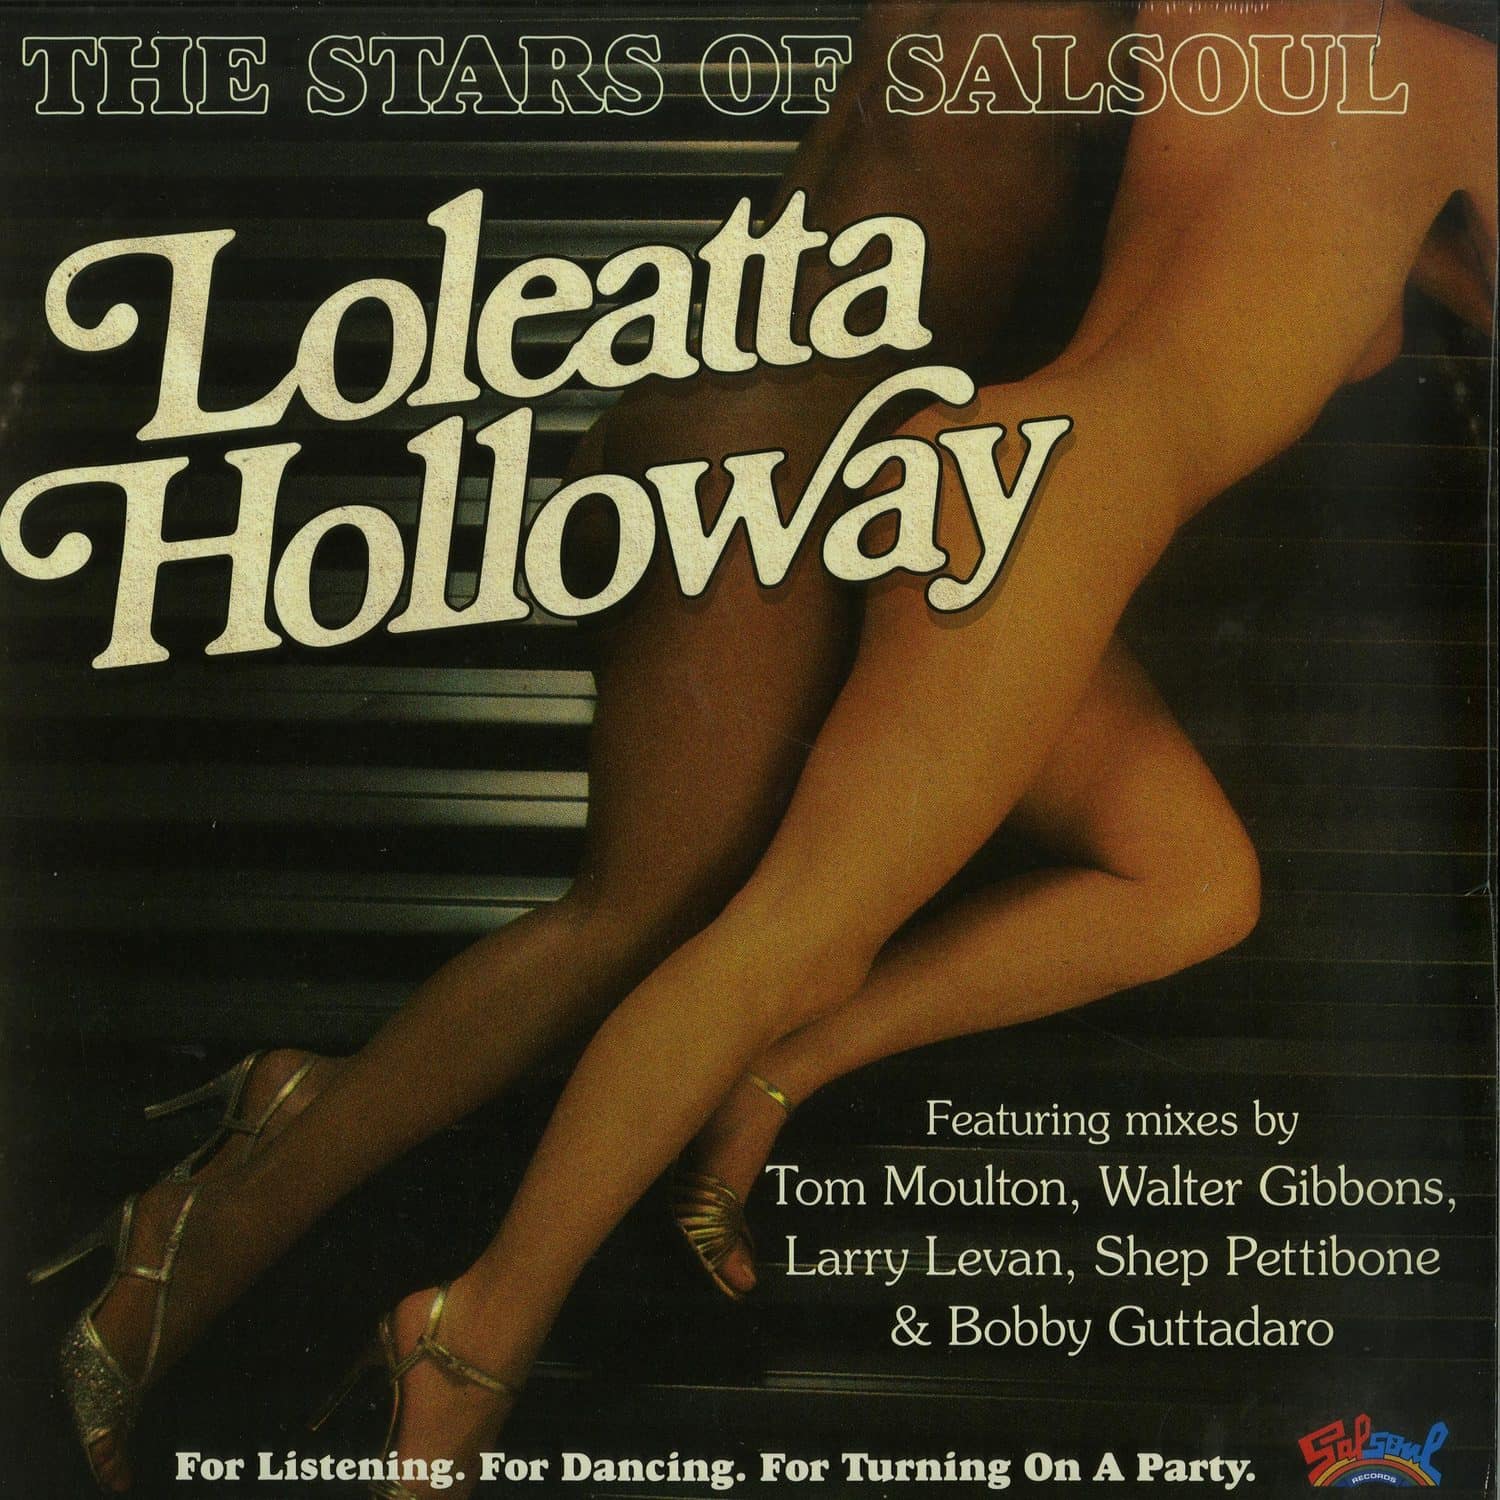 Loleatta Holloway - THE STARS OF SALSOUL 